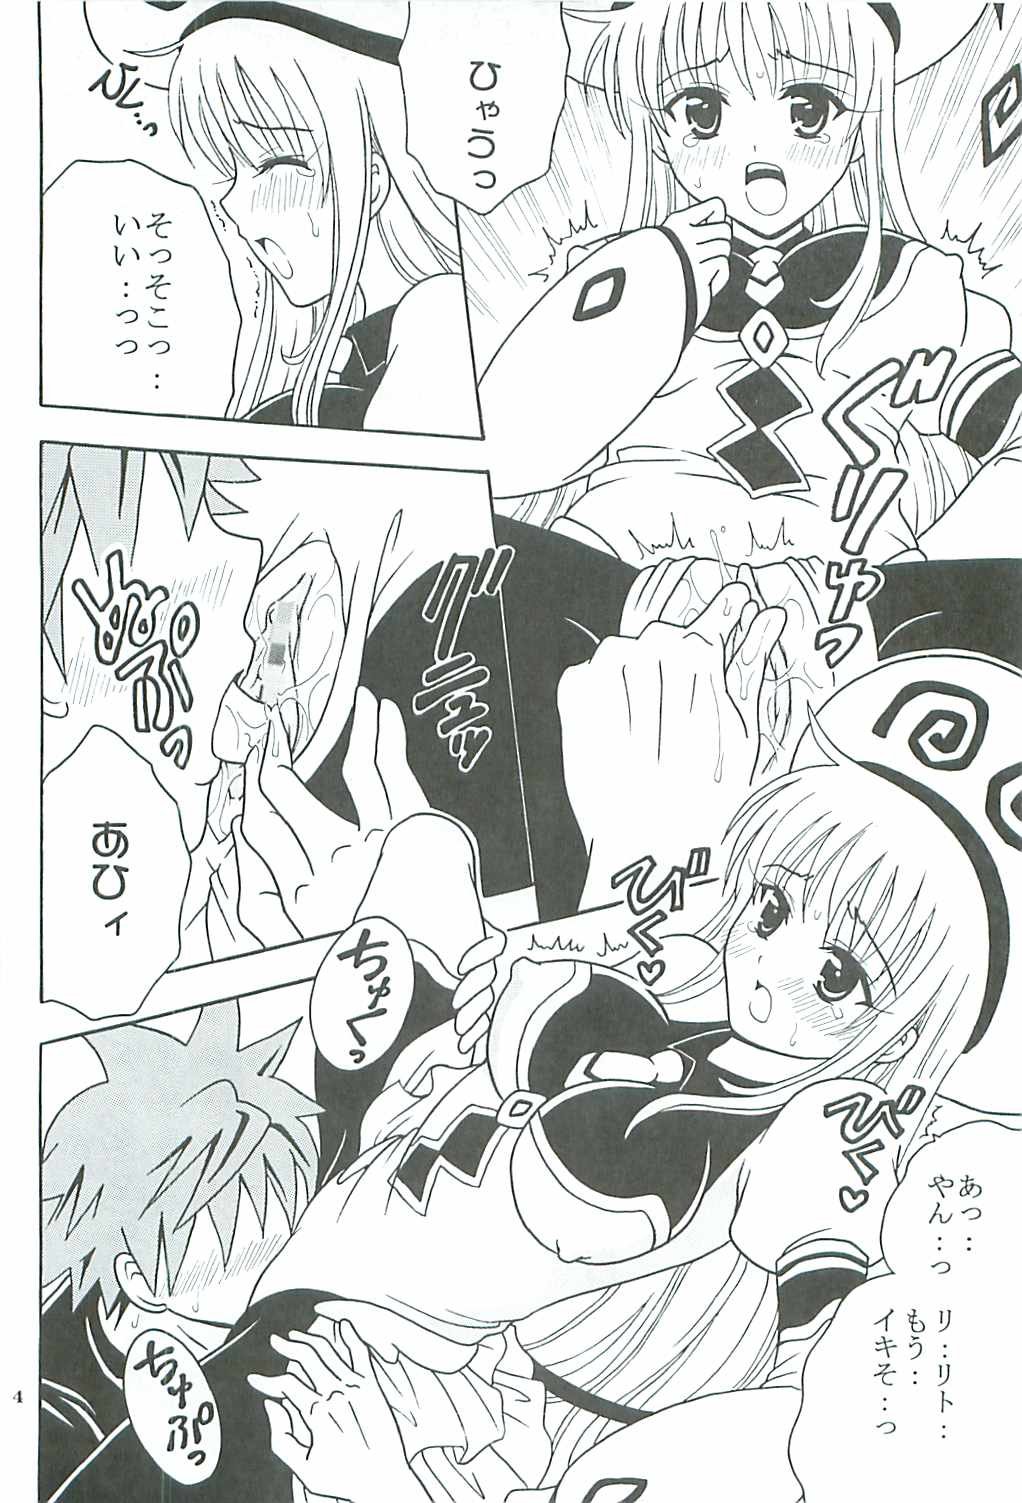 [St.Rio] ToLOVE Ryu 2 (To Love Ru) page 5 full